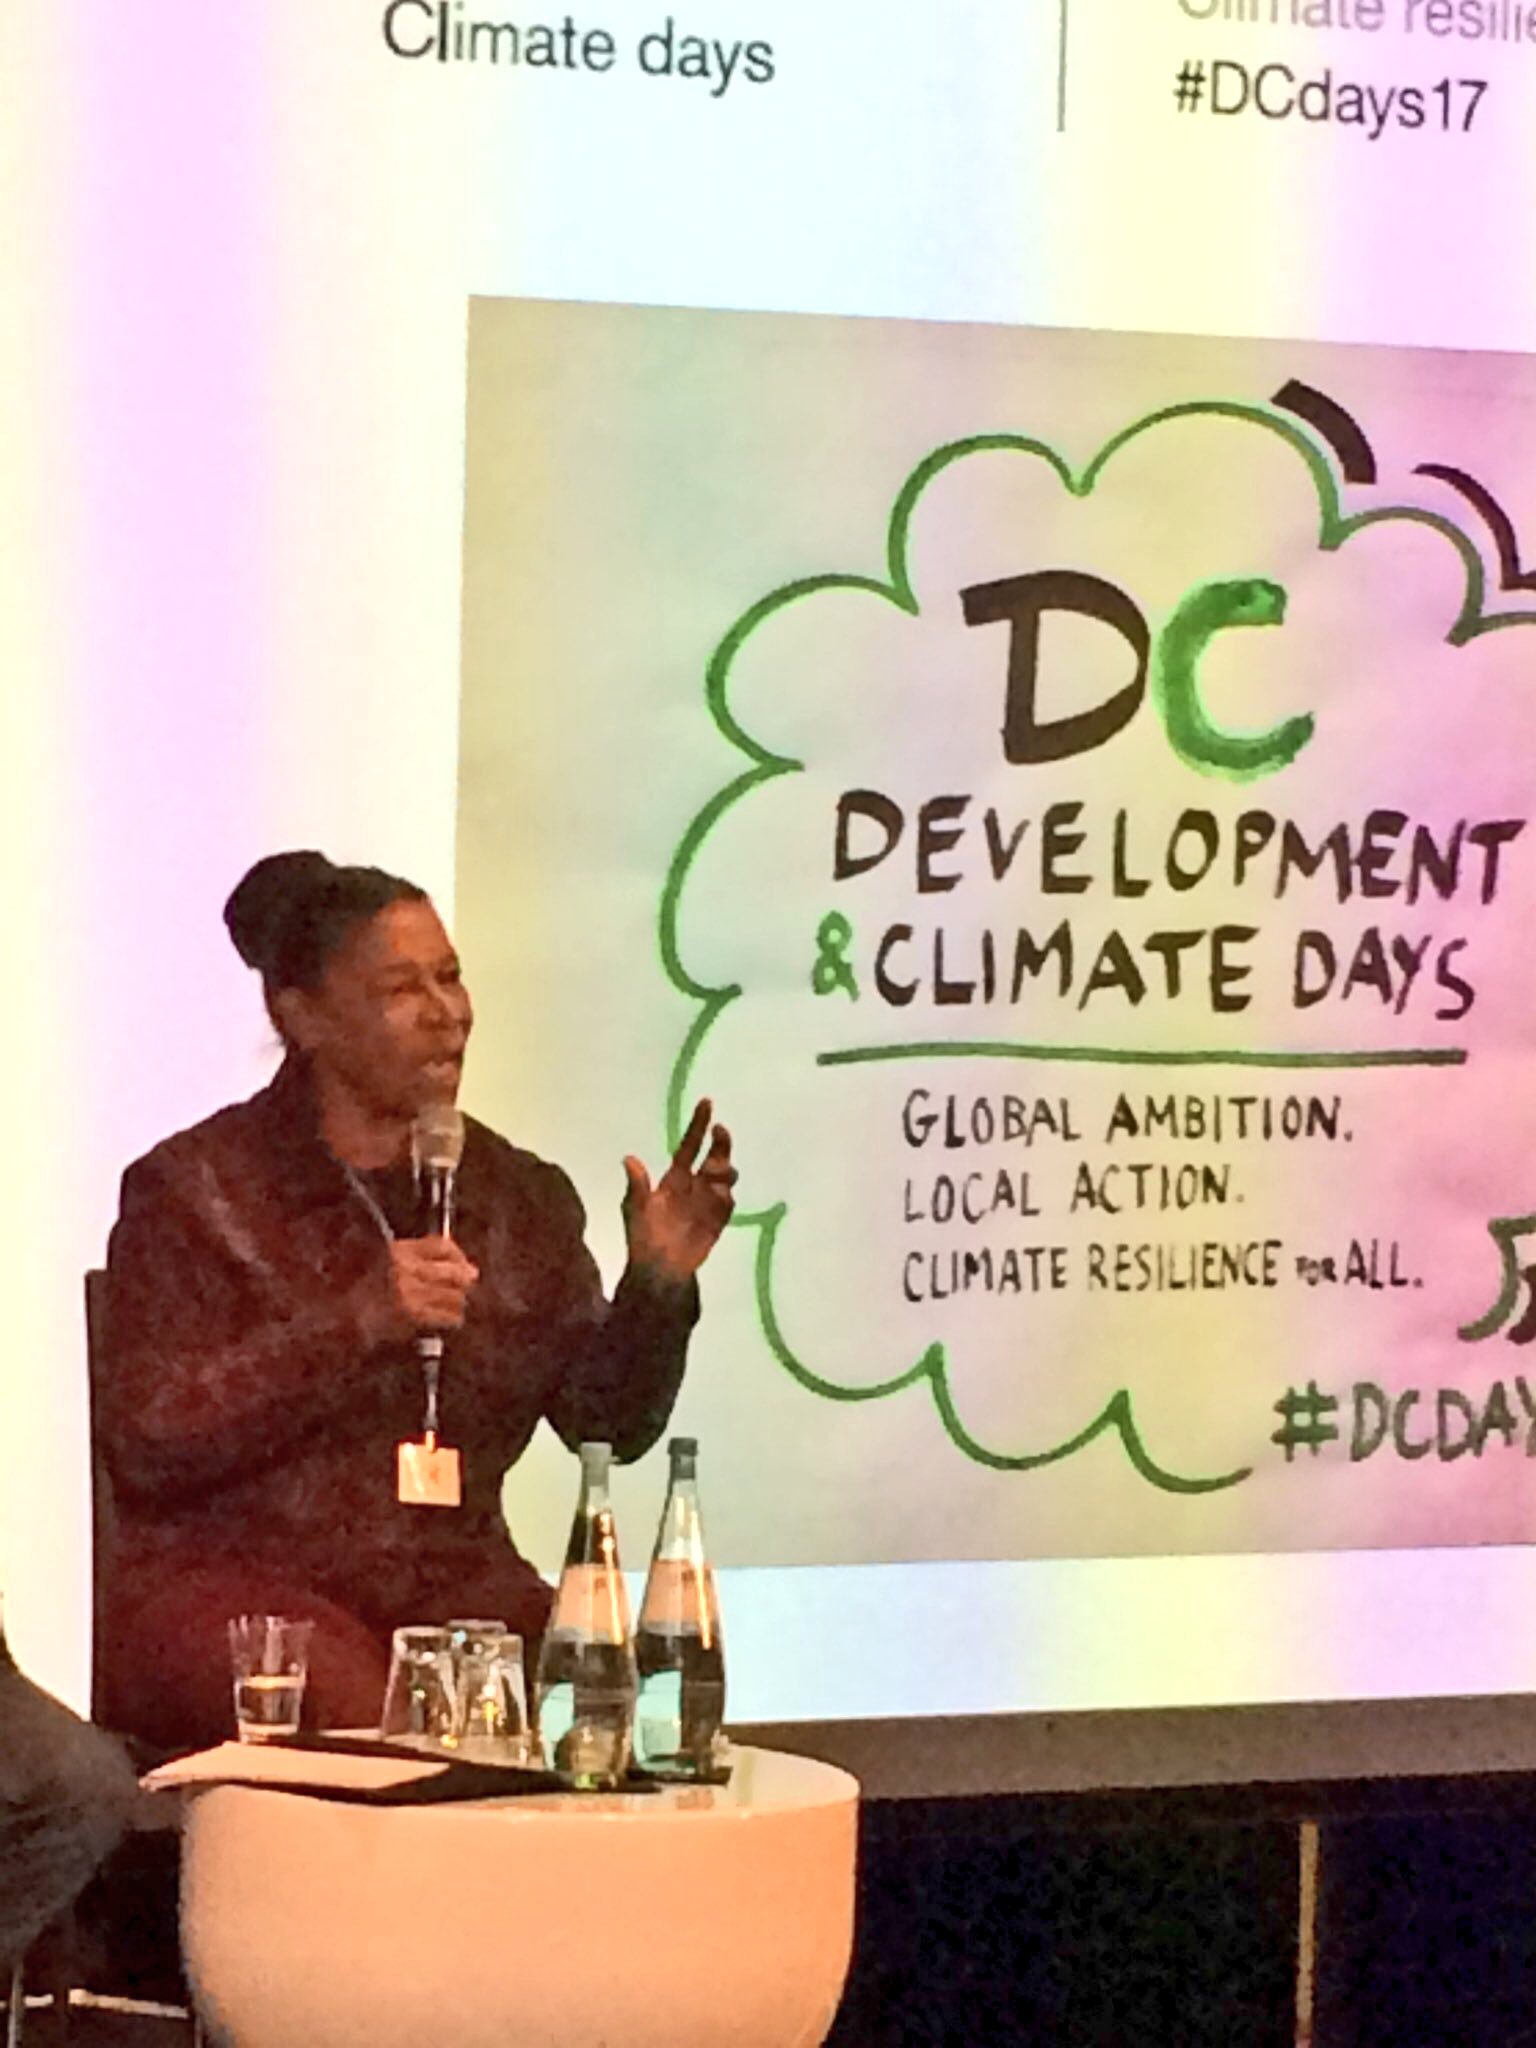 Ruth Spenser, Antigua reminds everyone at #dcdays17 that we have to be the change, it starts with us and we need to go home and work in partnership and make a difference. Let’s be committed and make it happen. https://t.co/GK3023IHQl